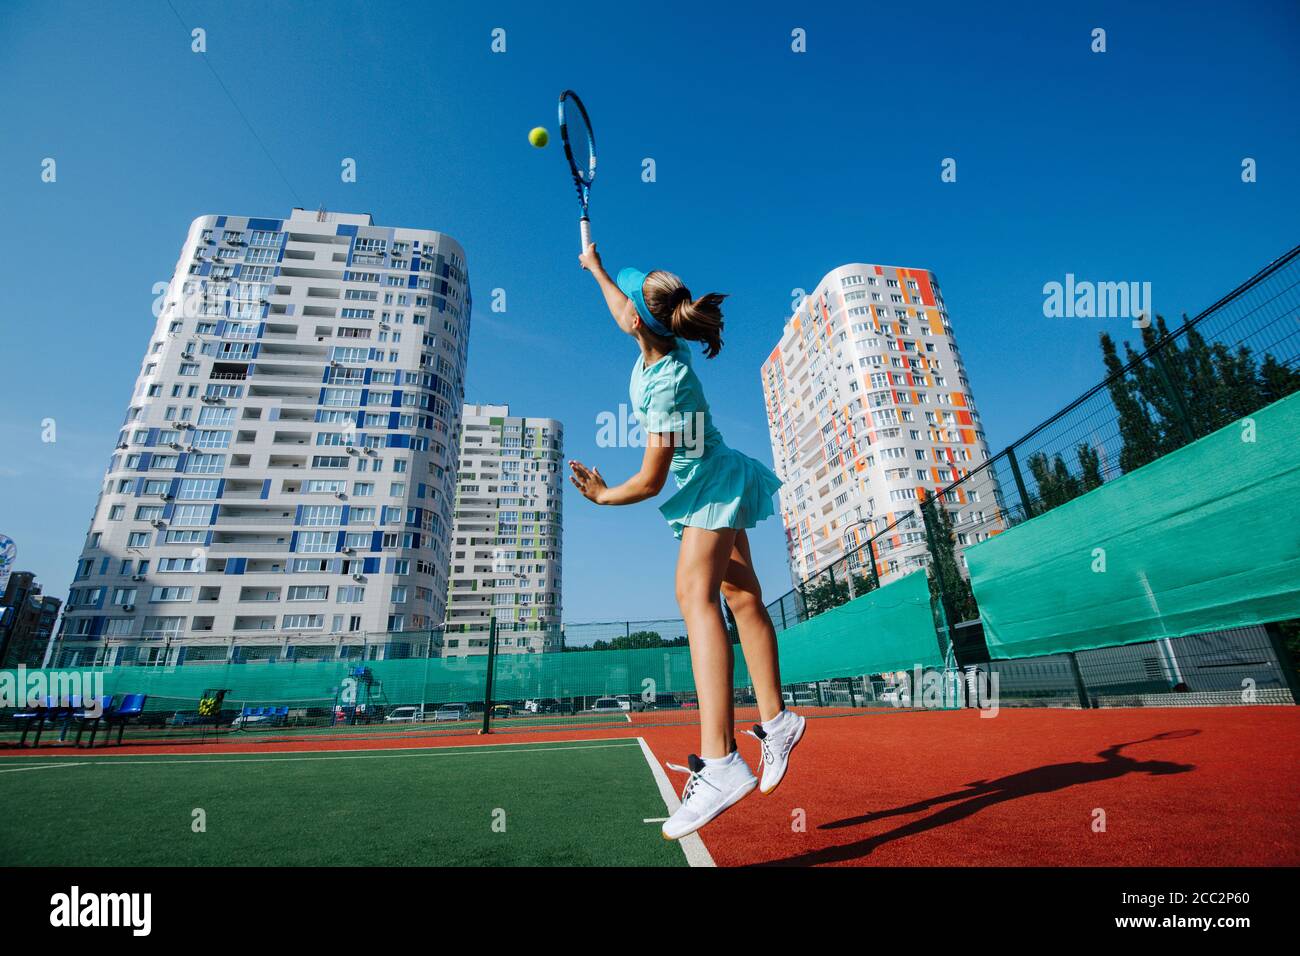 Jumping teenage girl training on a tennis court, throwing ball up and serving Stock Photo